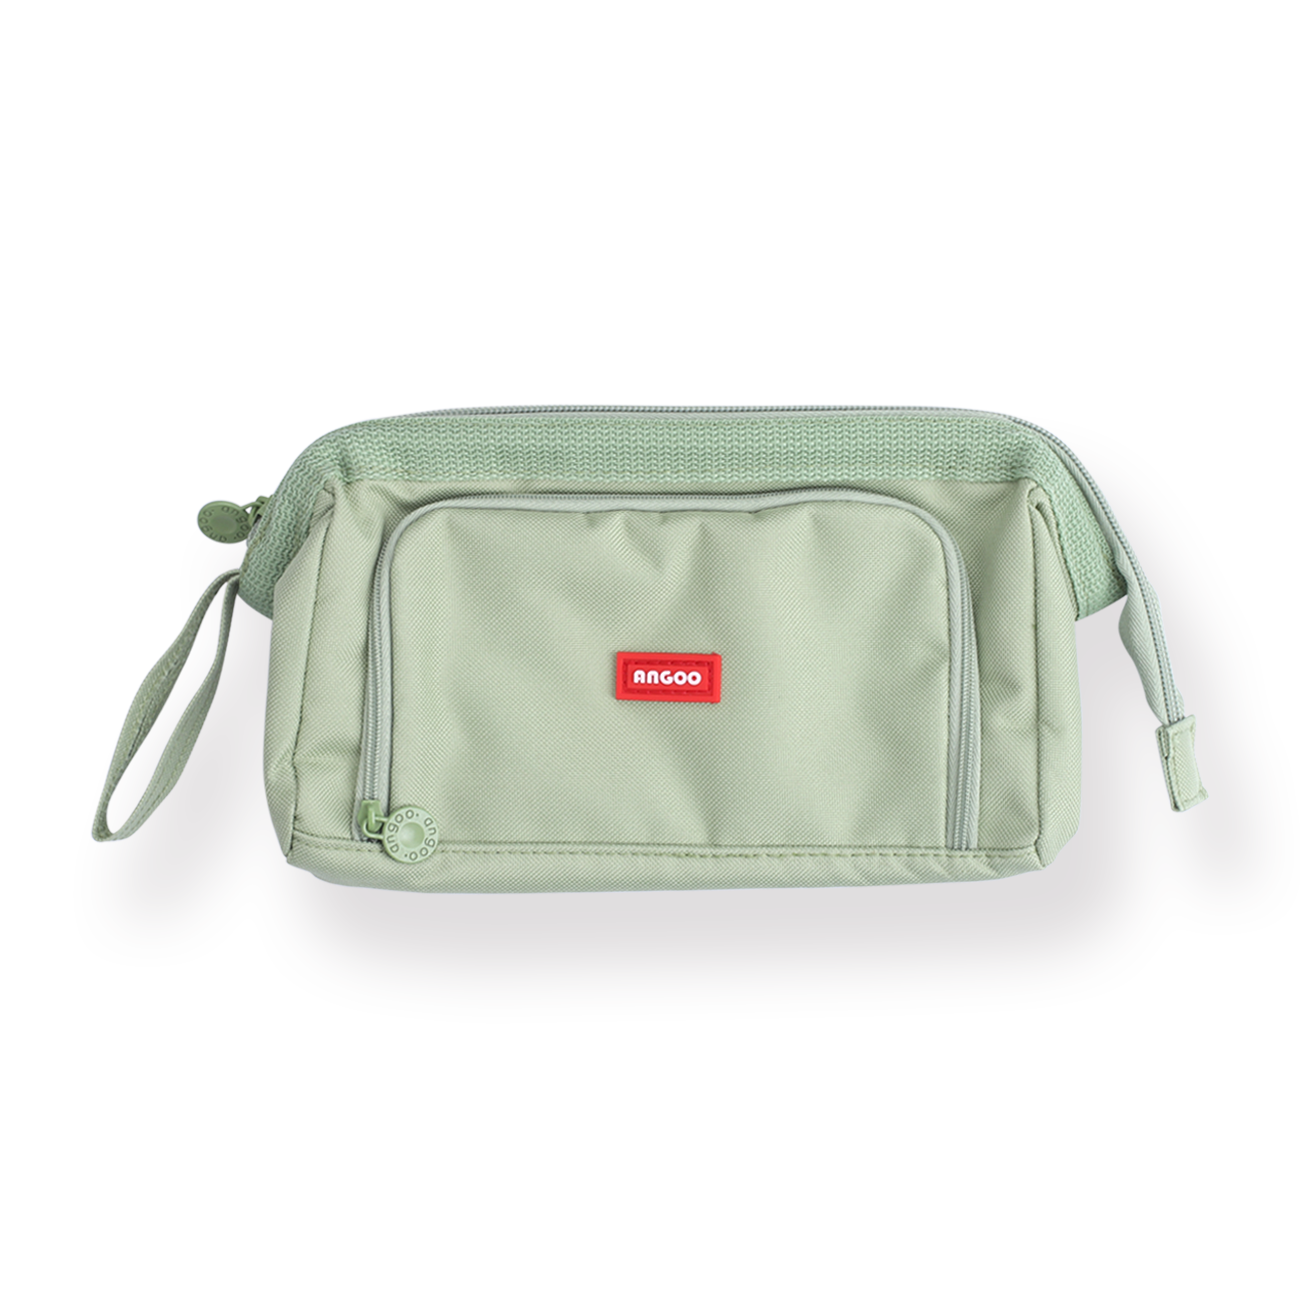 Stationery Pal Classic Large Pencil Case - Green